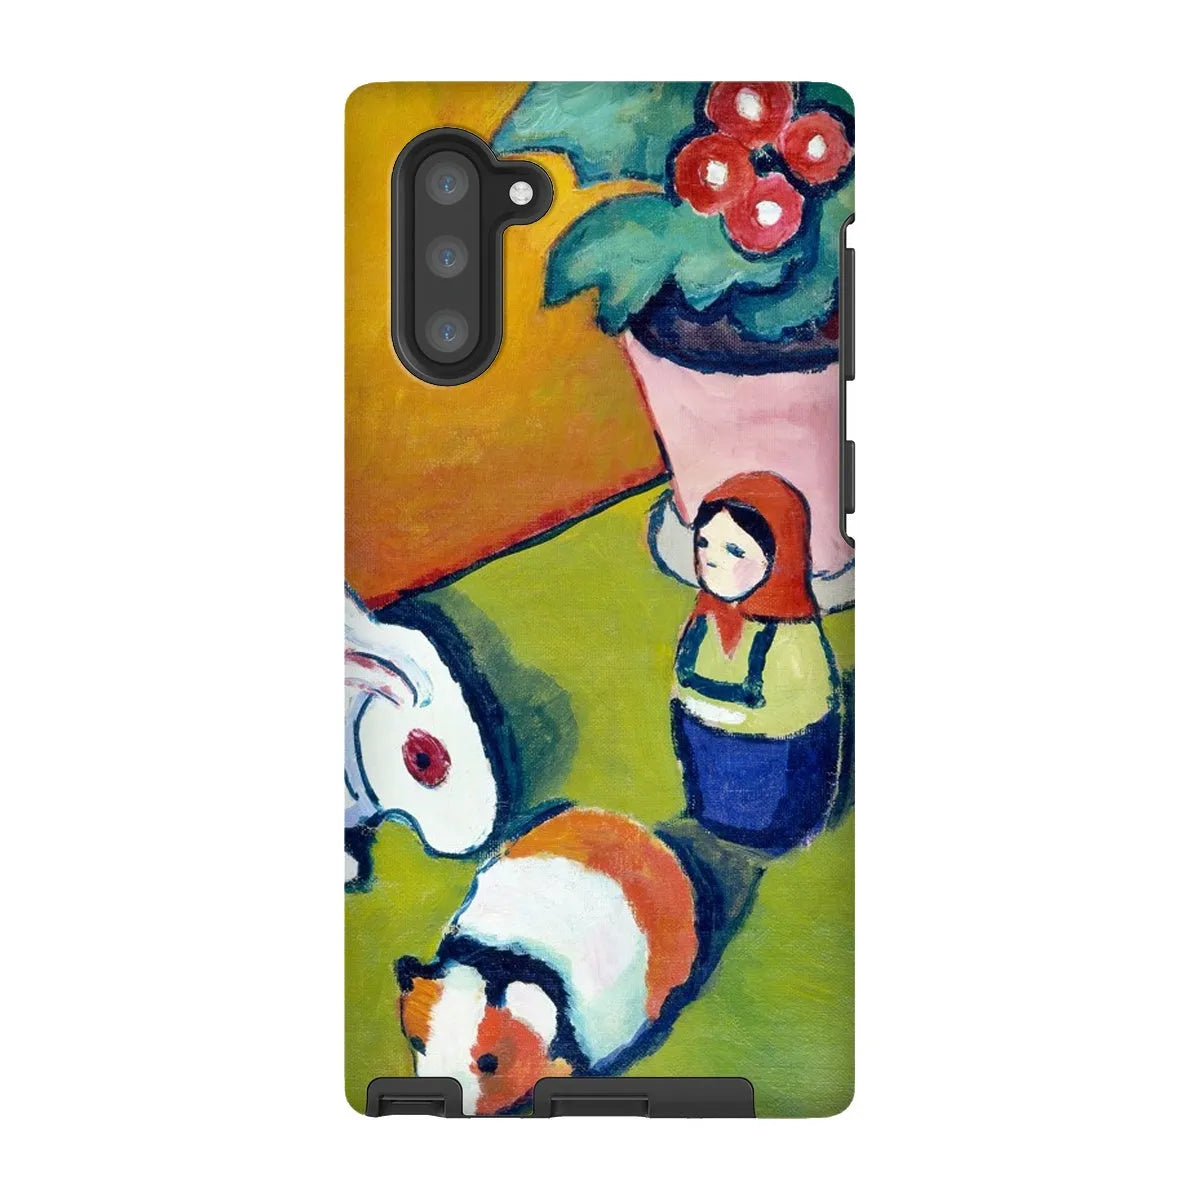 Little Walter’s Toys Art Phone Case - August Macke - Samsung Galaxy Note 10 / Matte - Mobile Phone Cases - Aesthetic Art